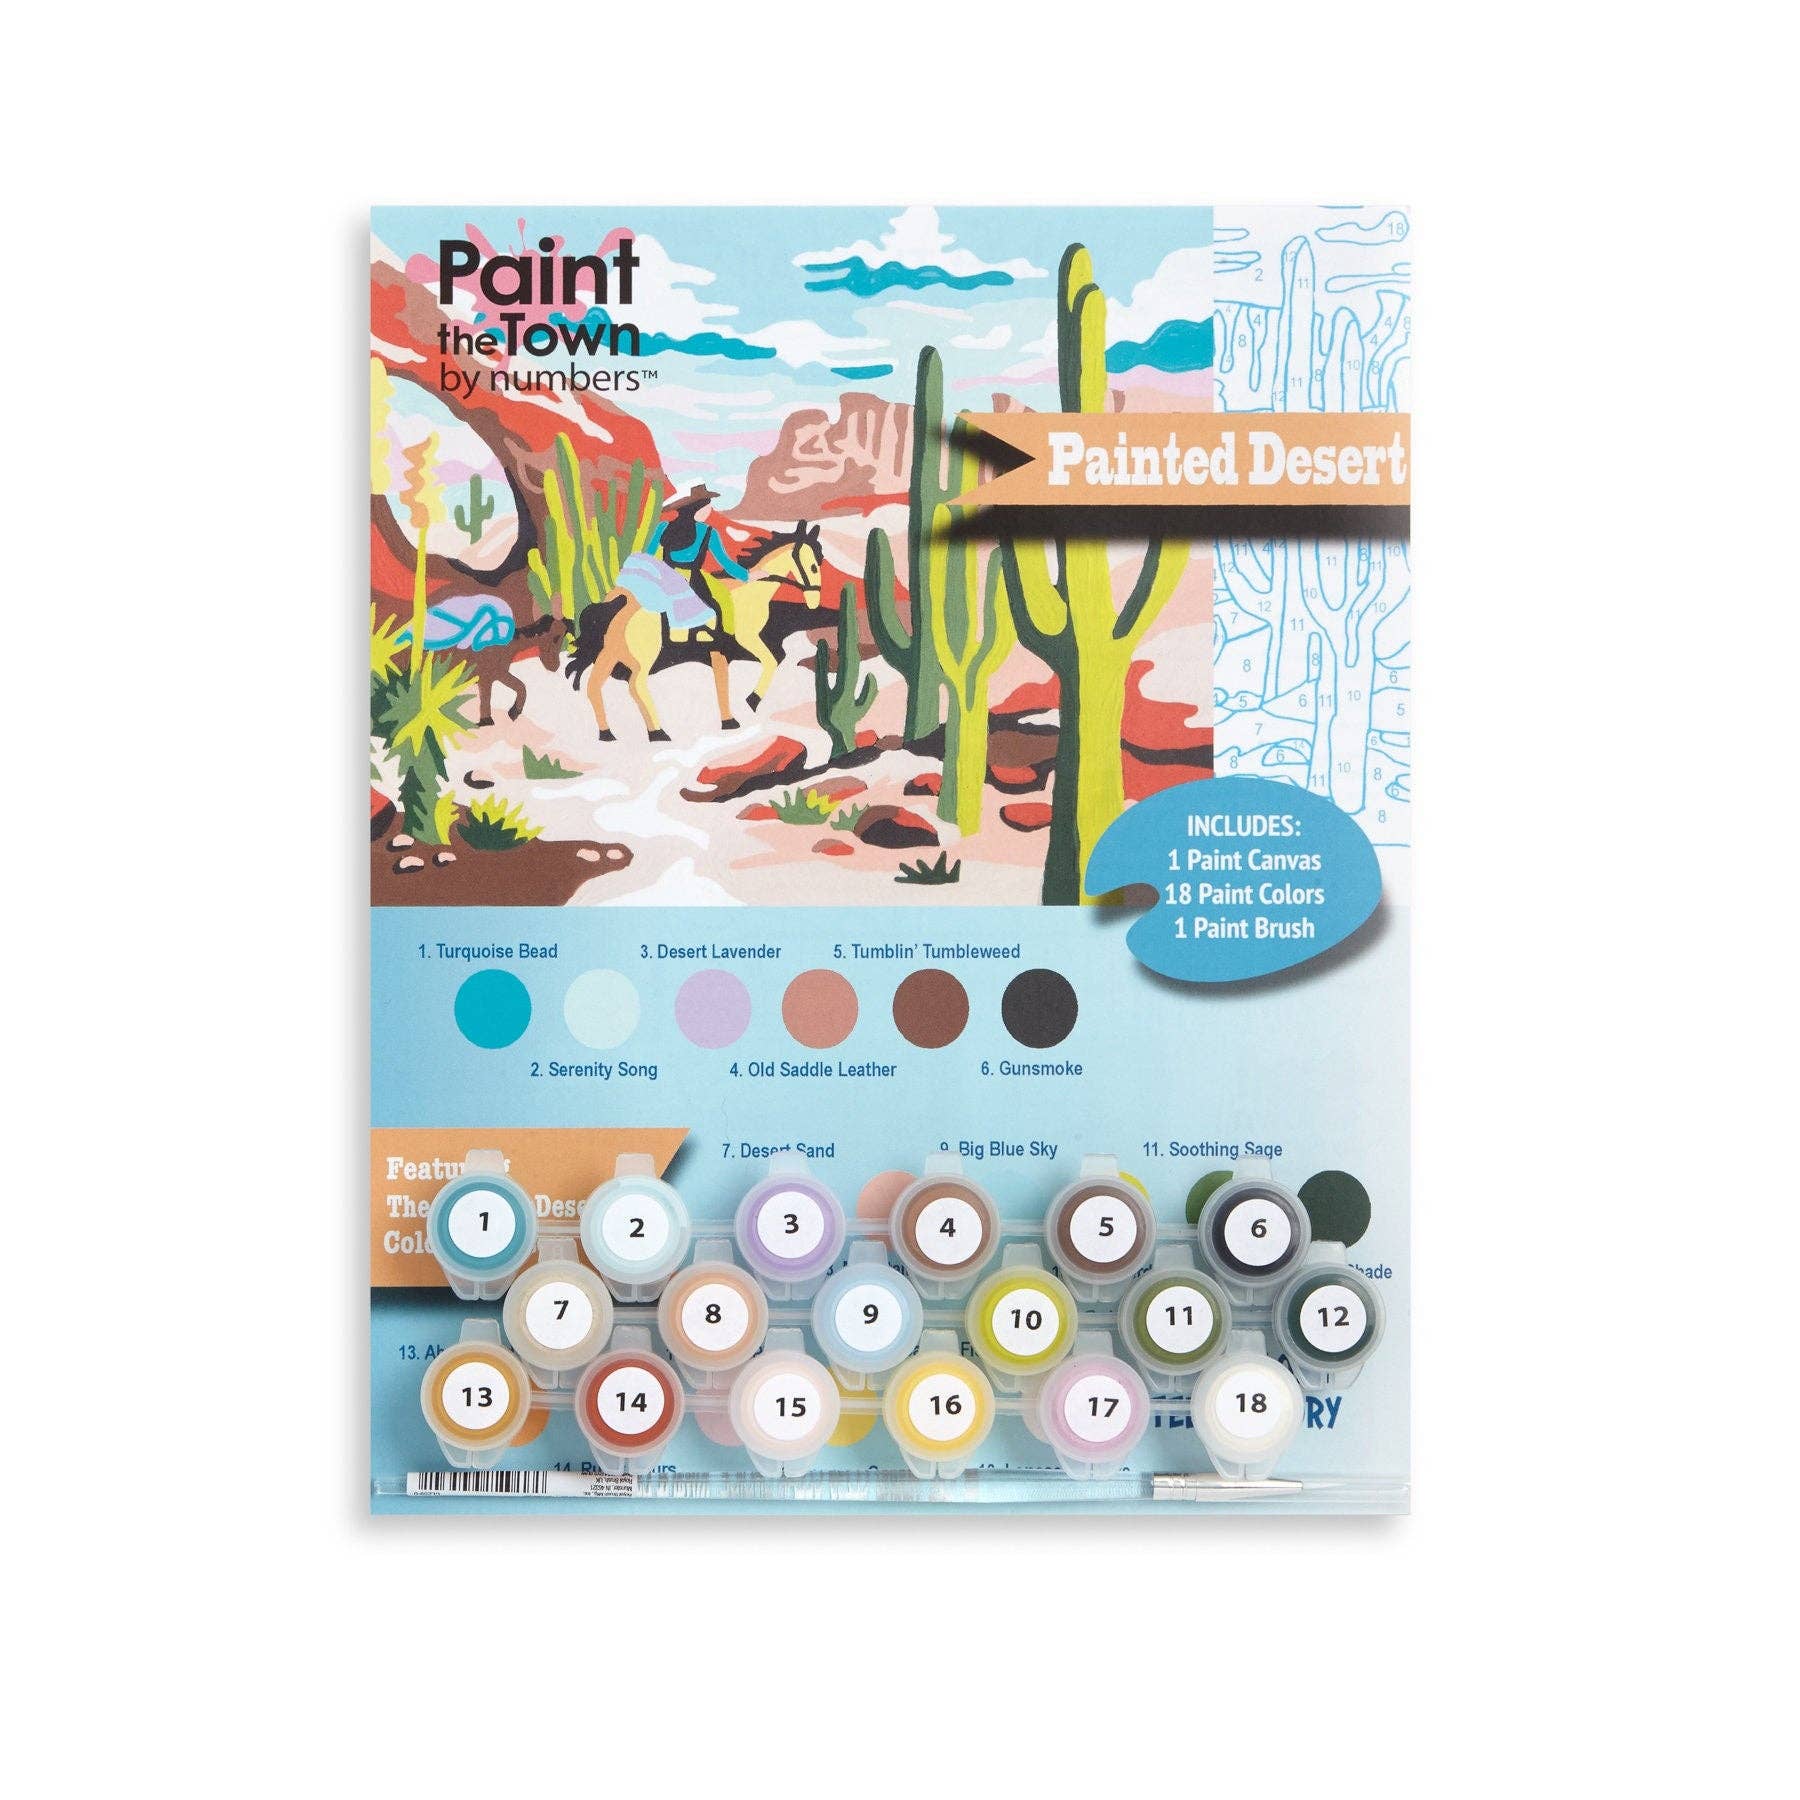 Painted Desert Paint by Number Kit